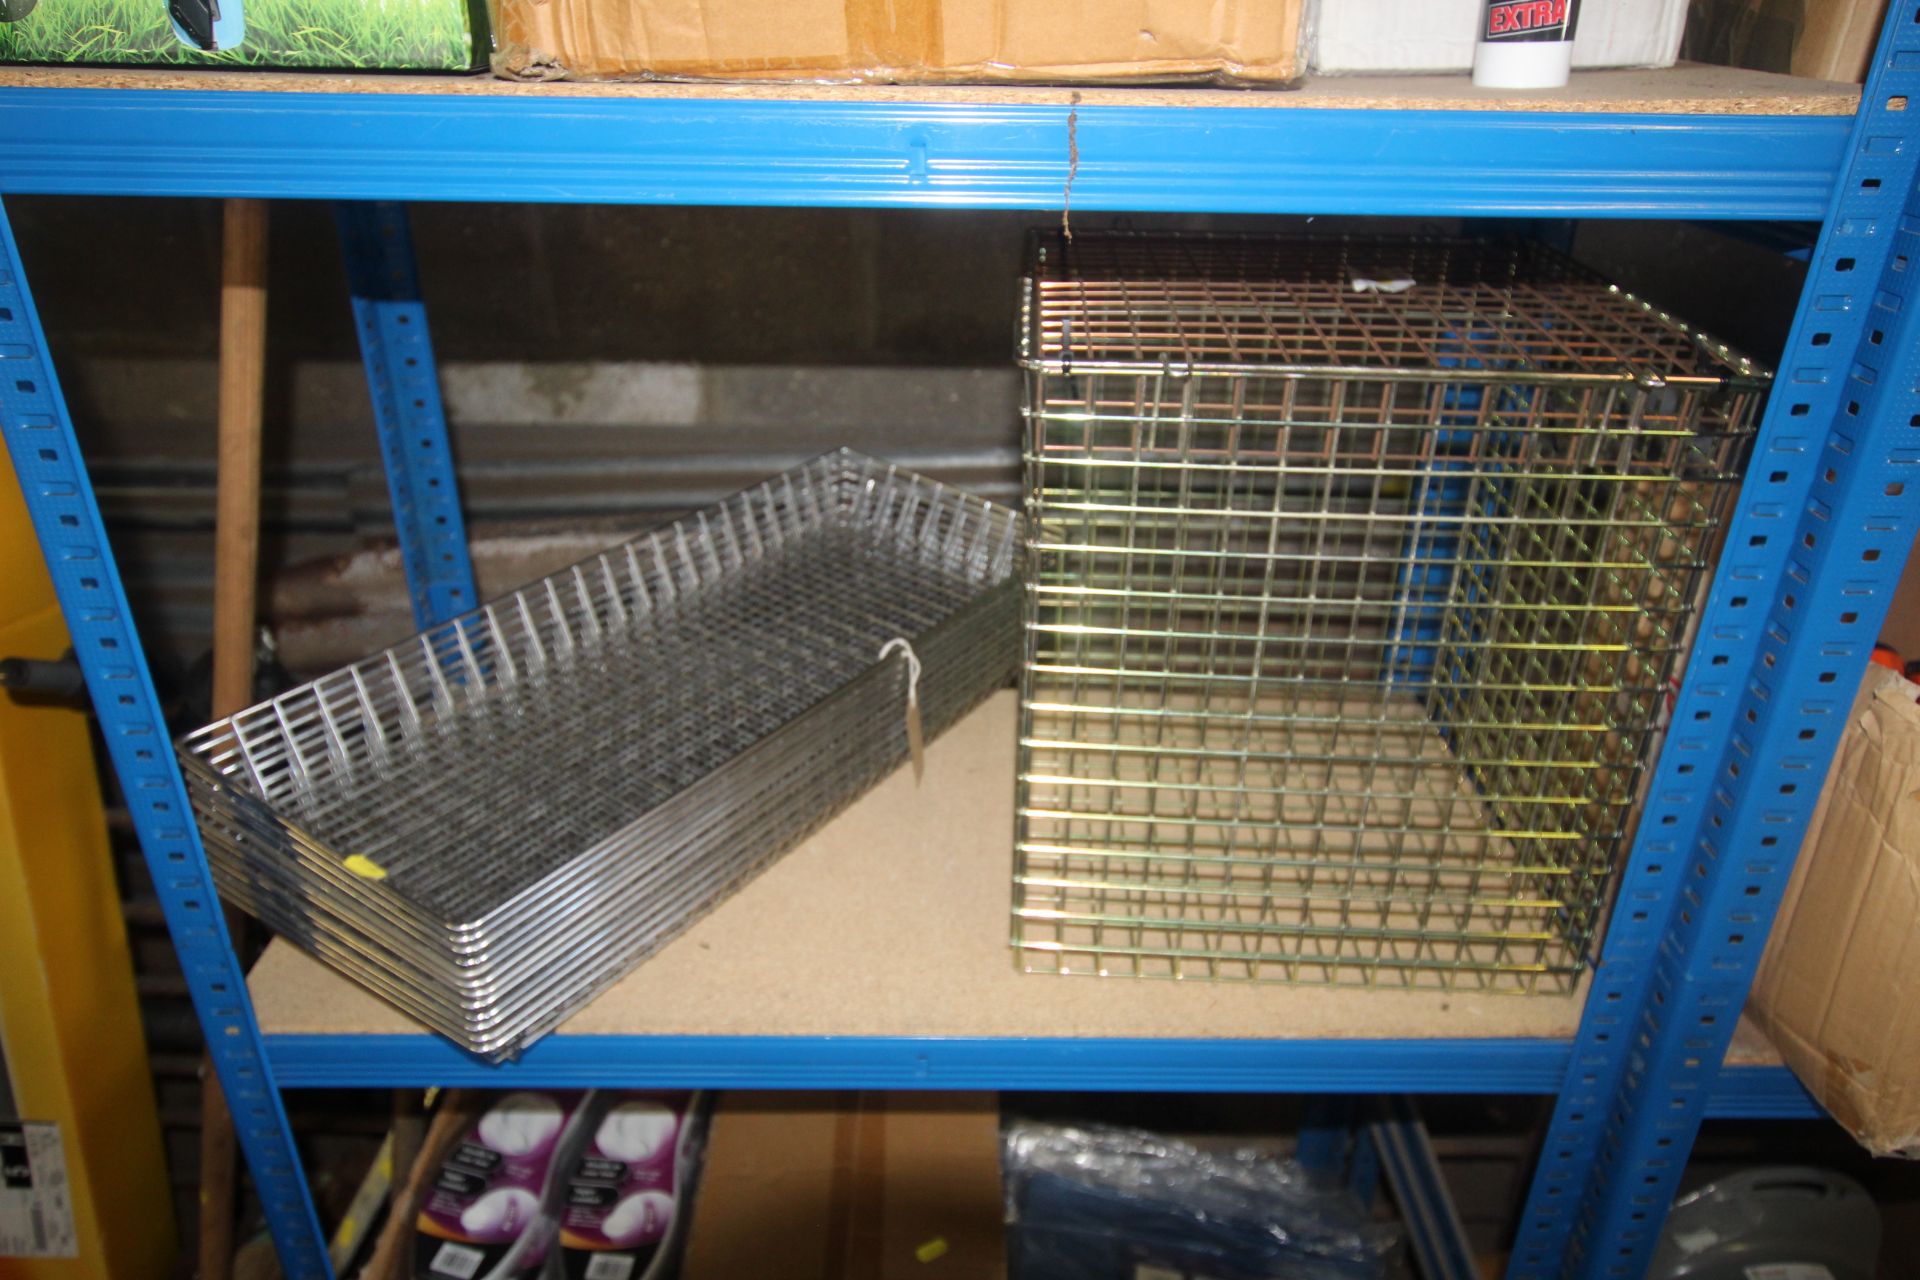 Twelve metal wire baskets and a metal post cage